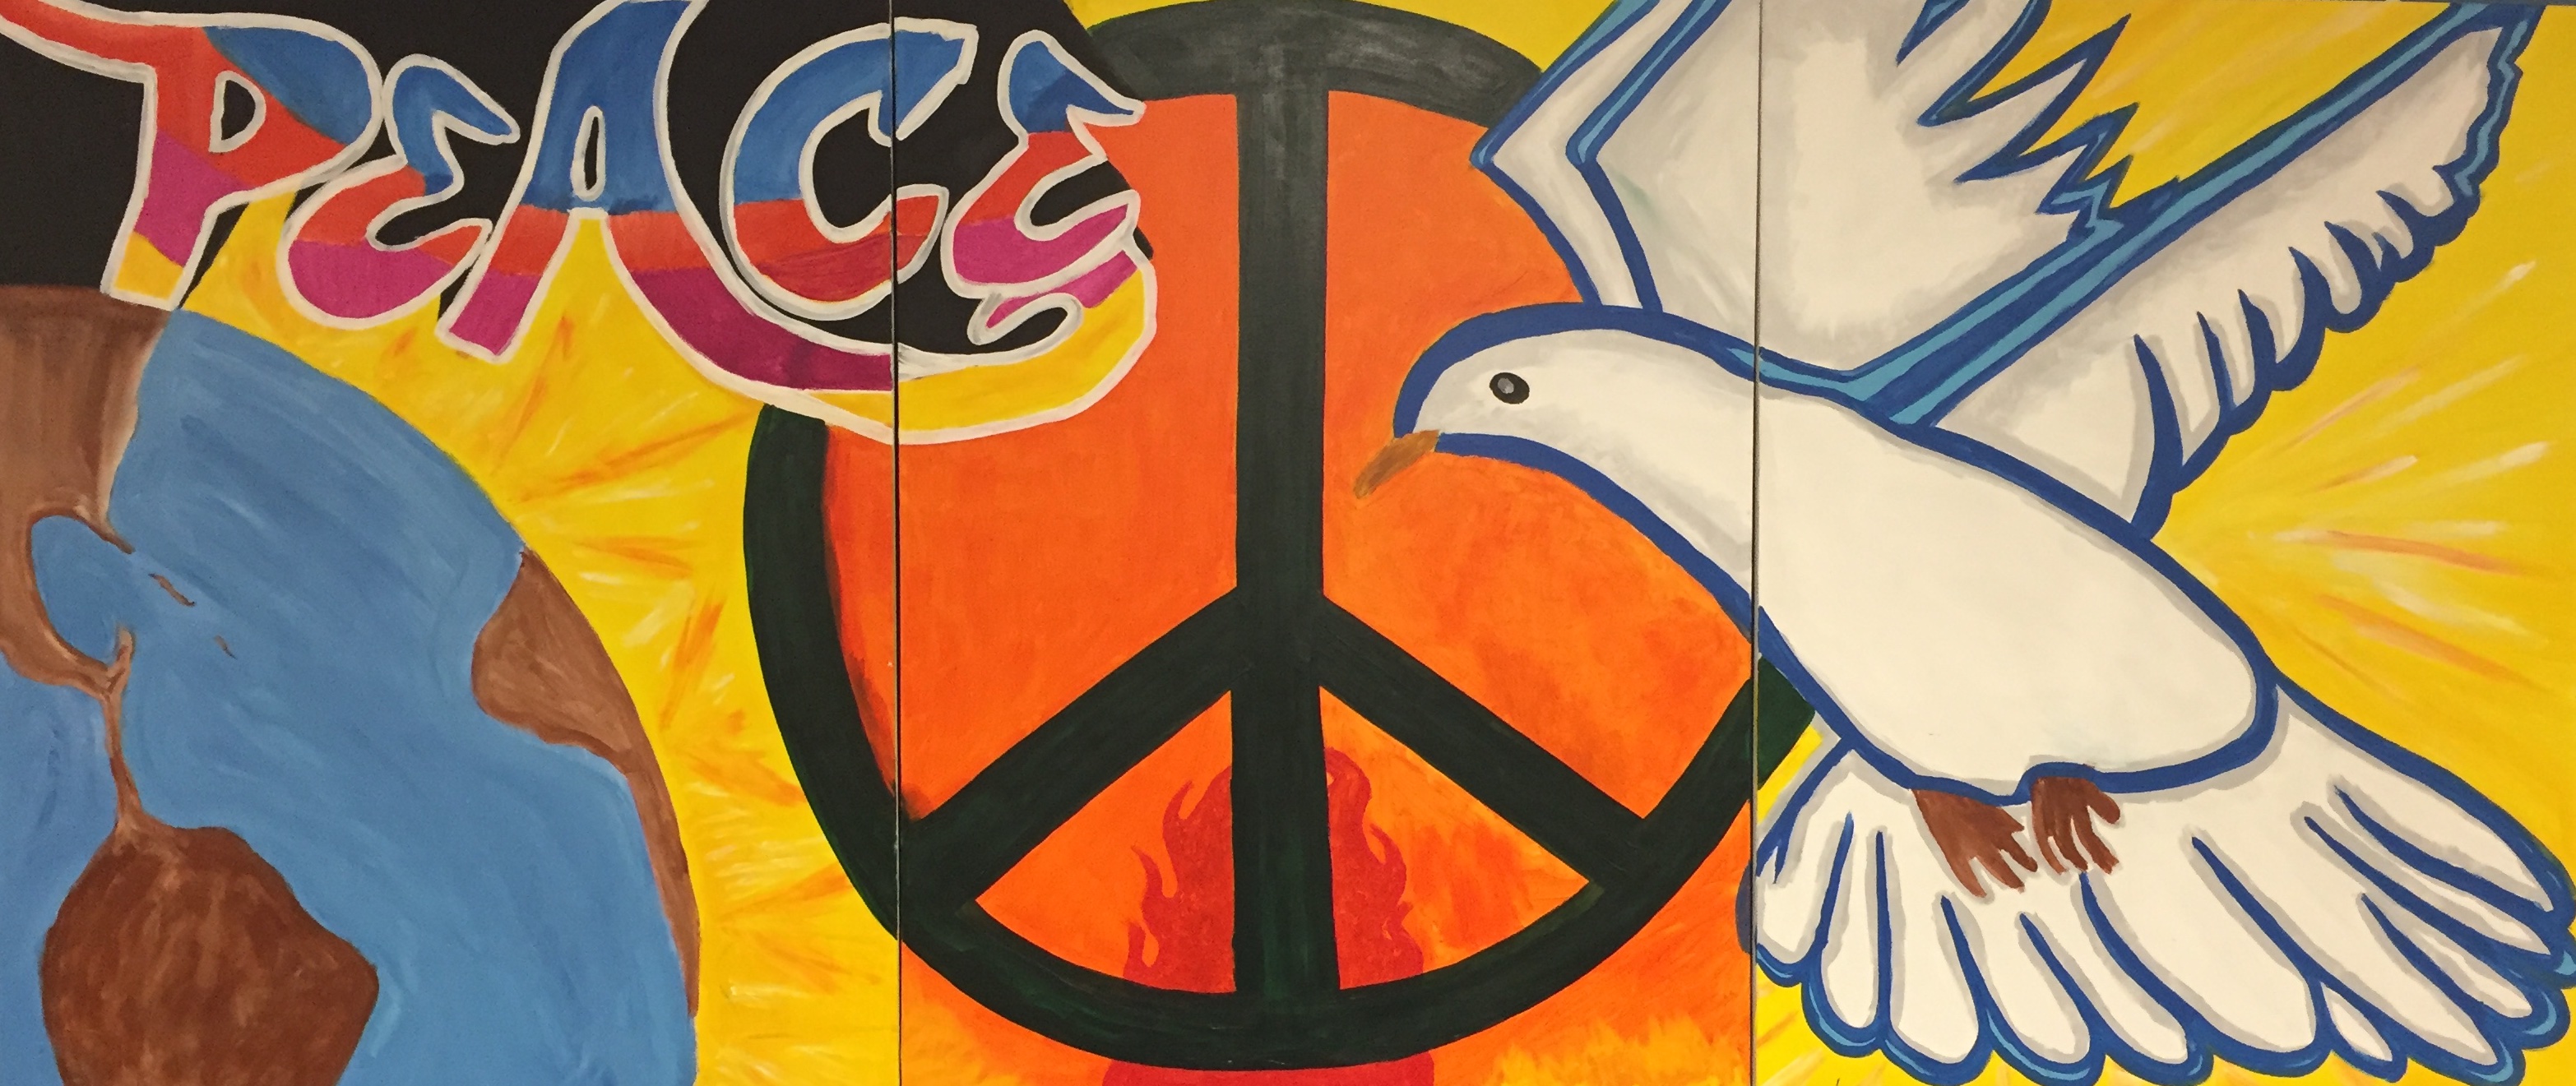 "Peace" mural hanging in the library at Dane County Juvenile Detention Center